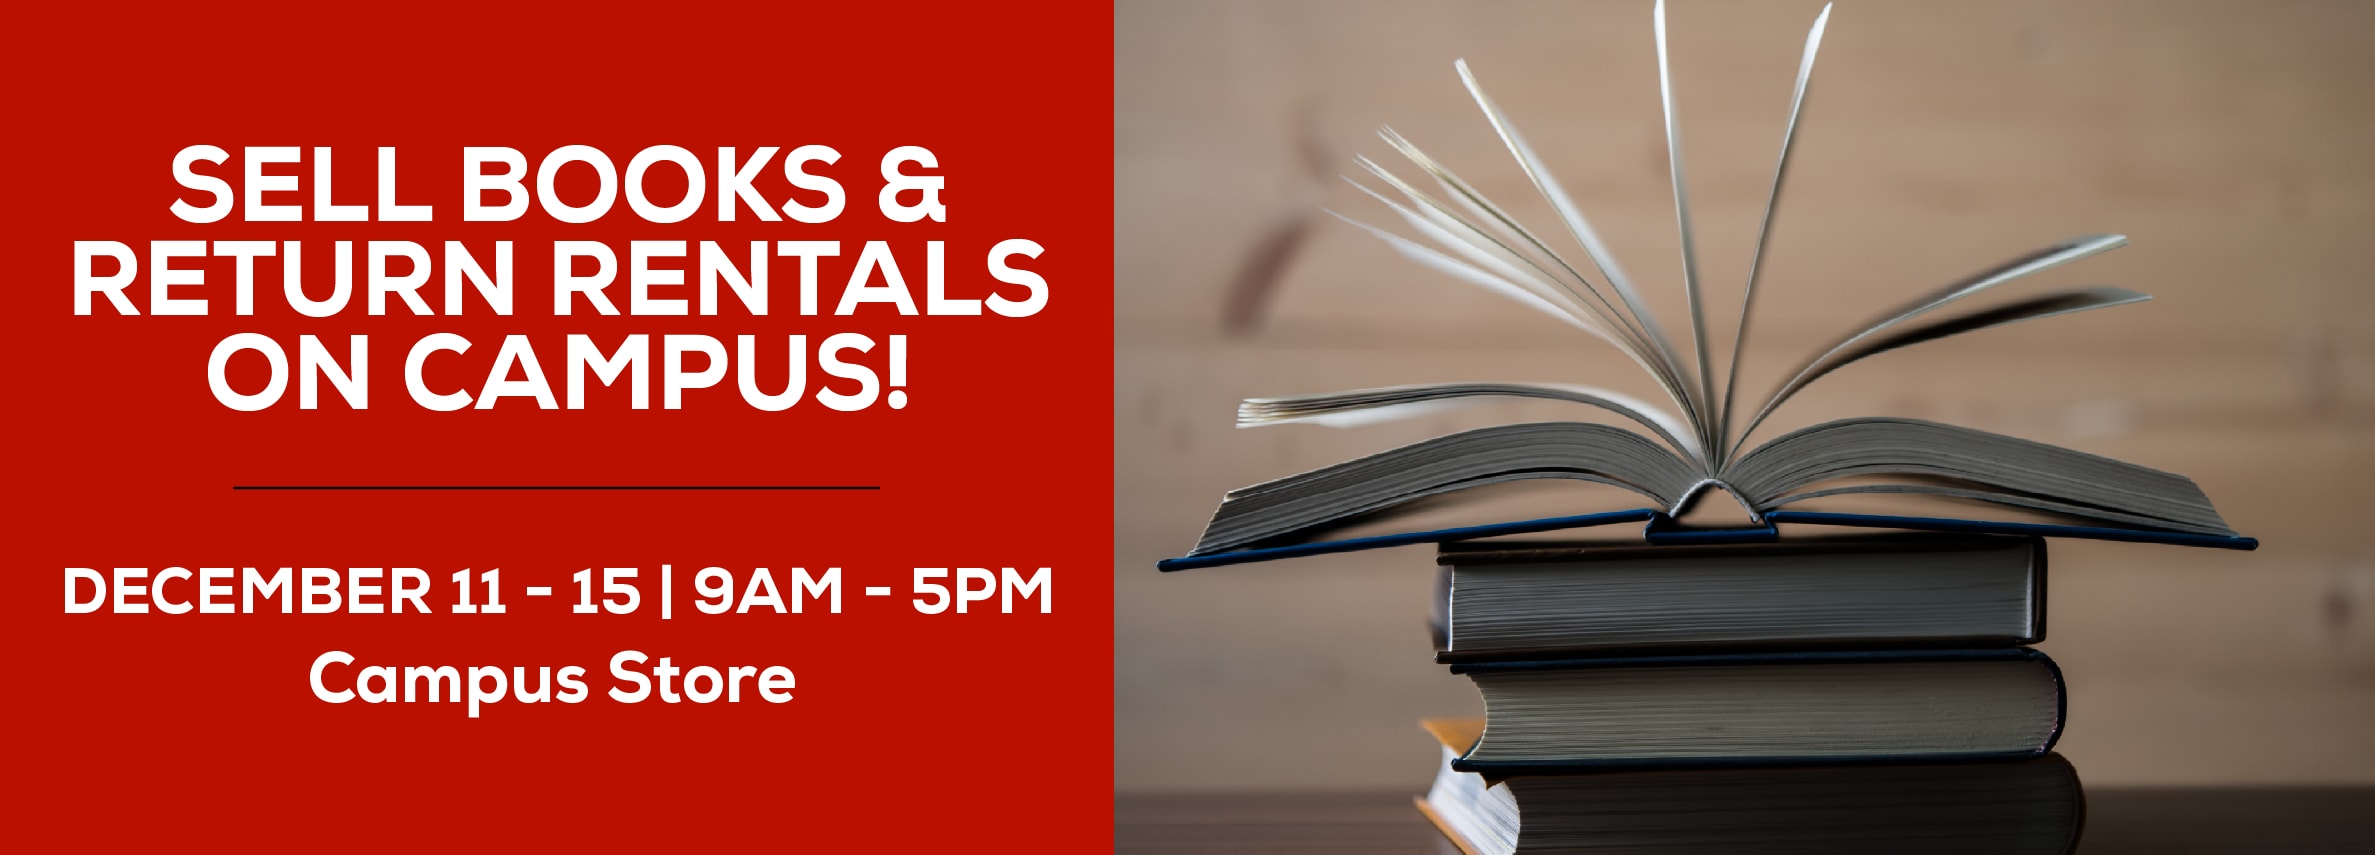 Sell books and return rentals on campus! May 3 - 10. Monday through Friday. 9am to 5pm at the Campus Store.